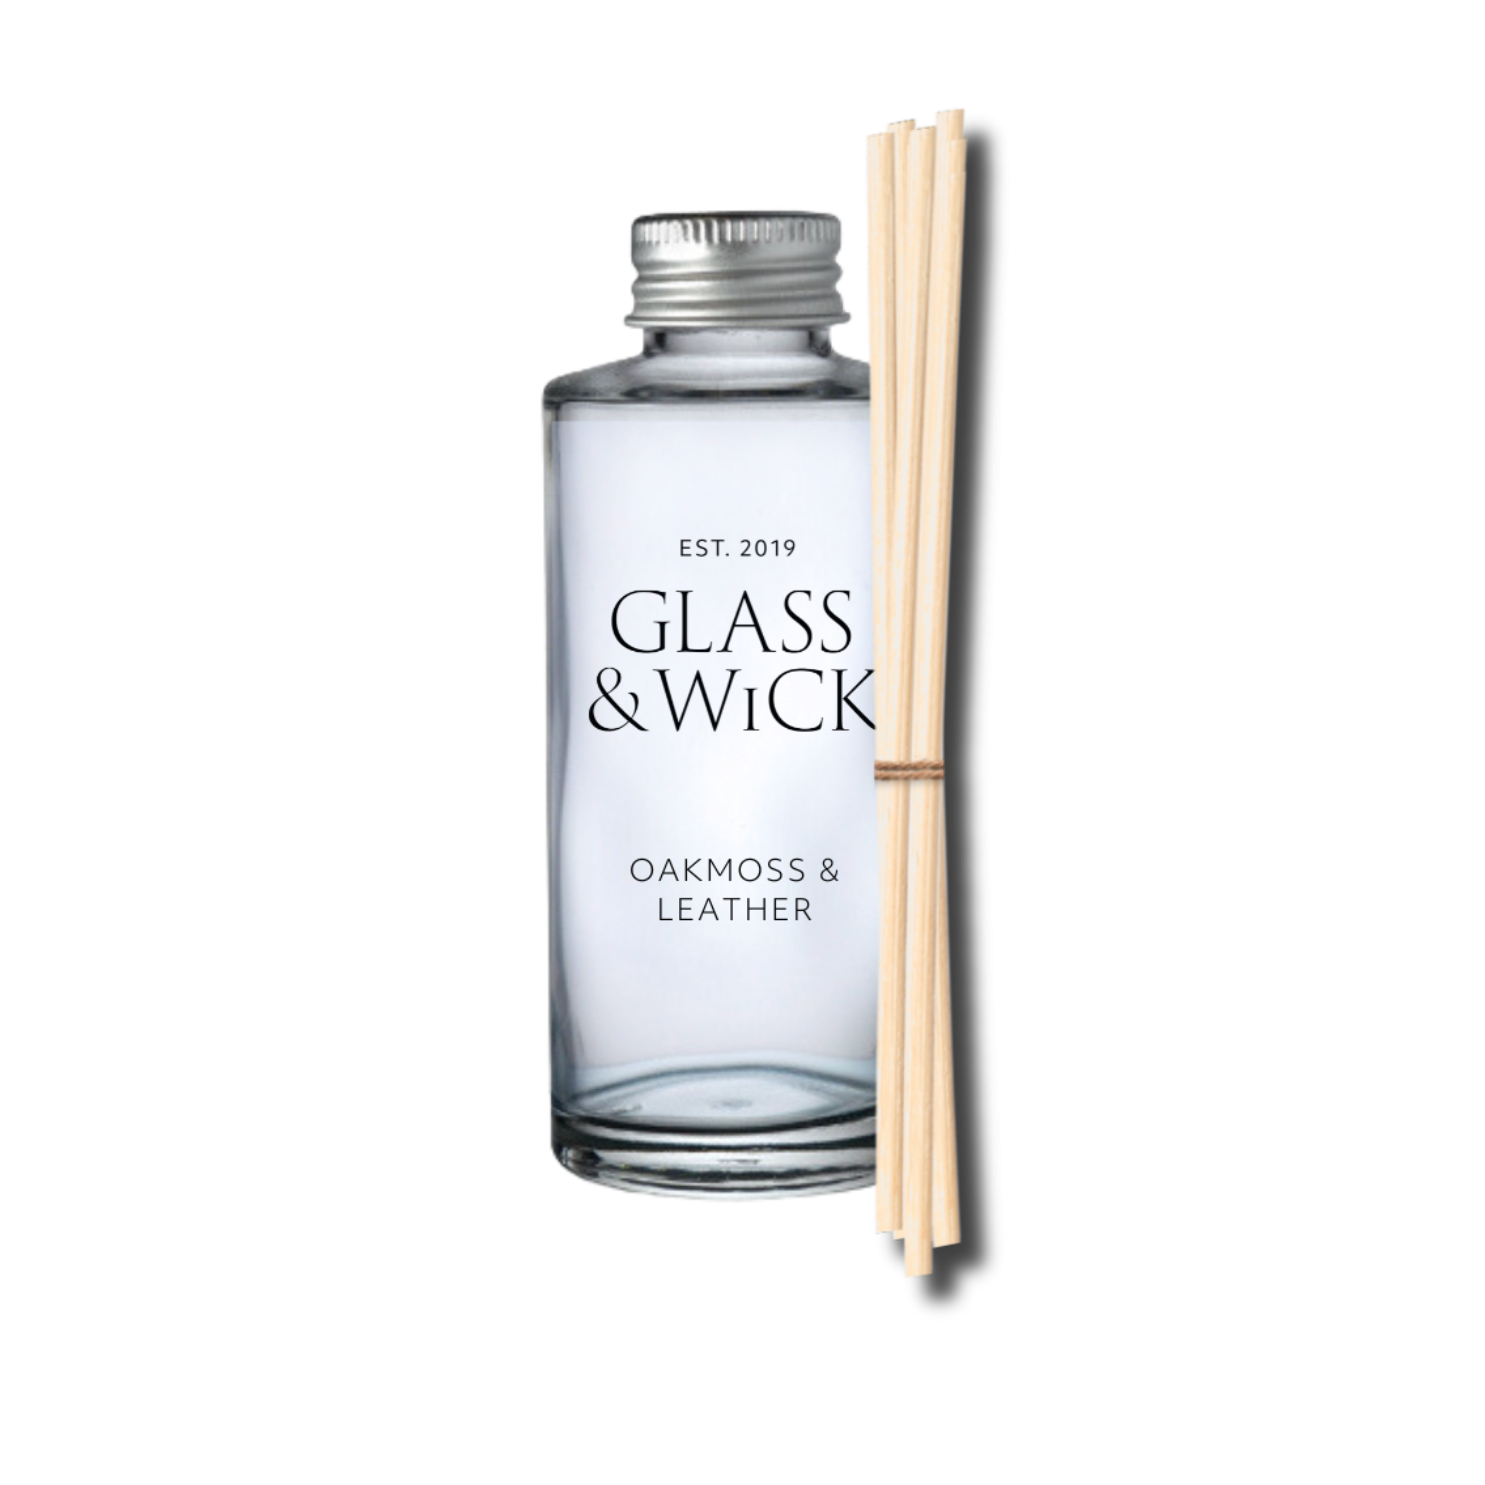 Oakmoss & Leather Reed Diffuser Refill